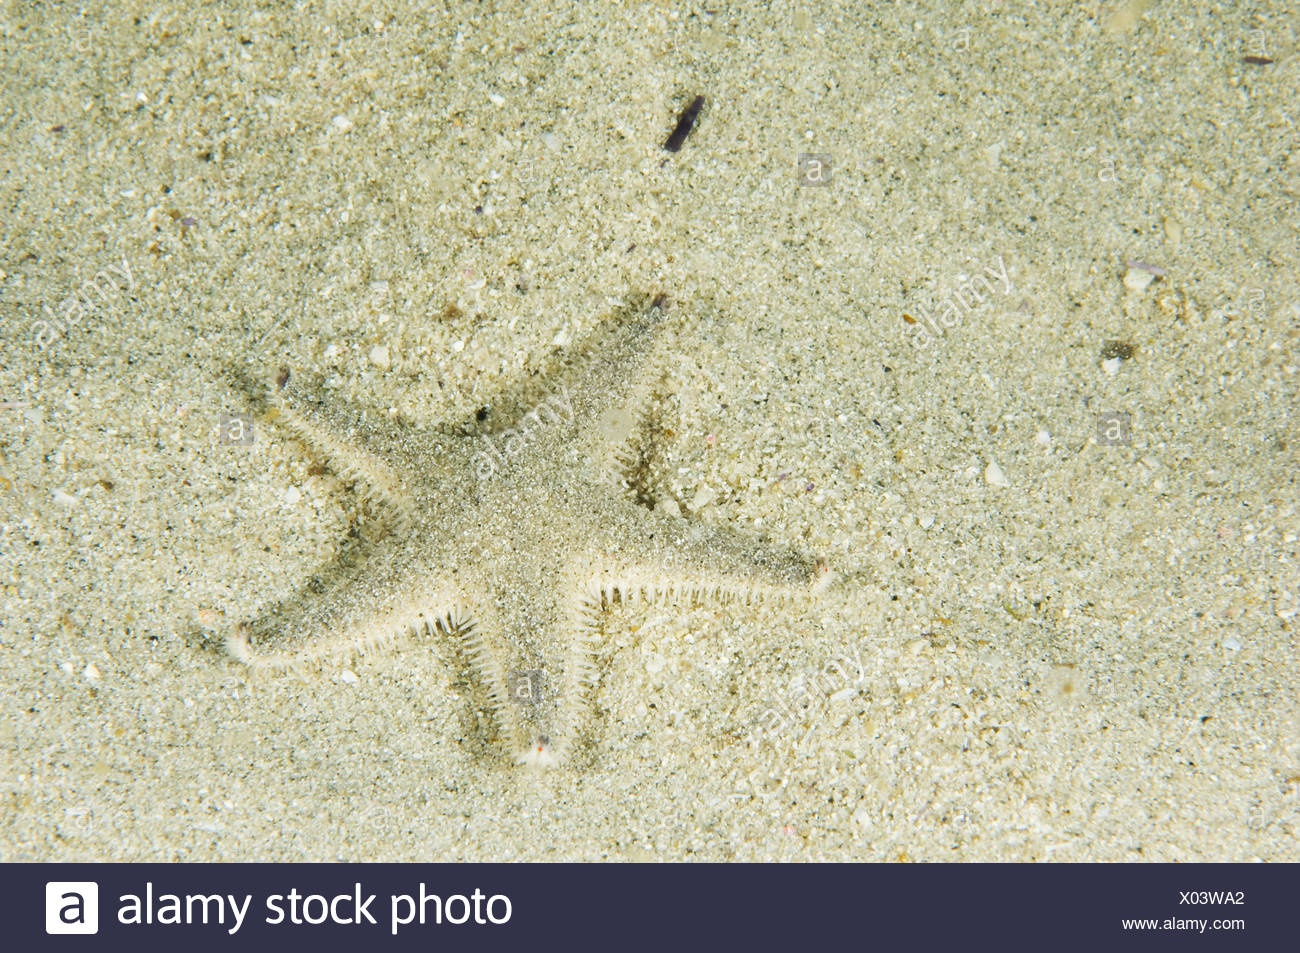 A Starfish In The Sand On The Ocean Floor Off San Miguel Island